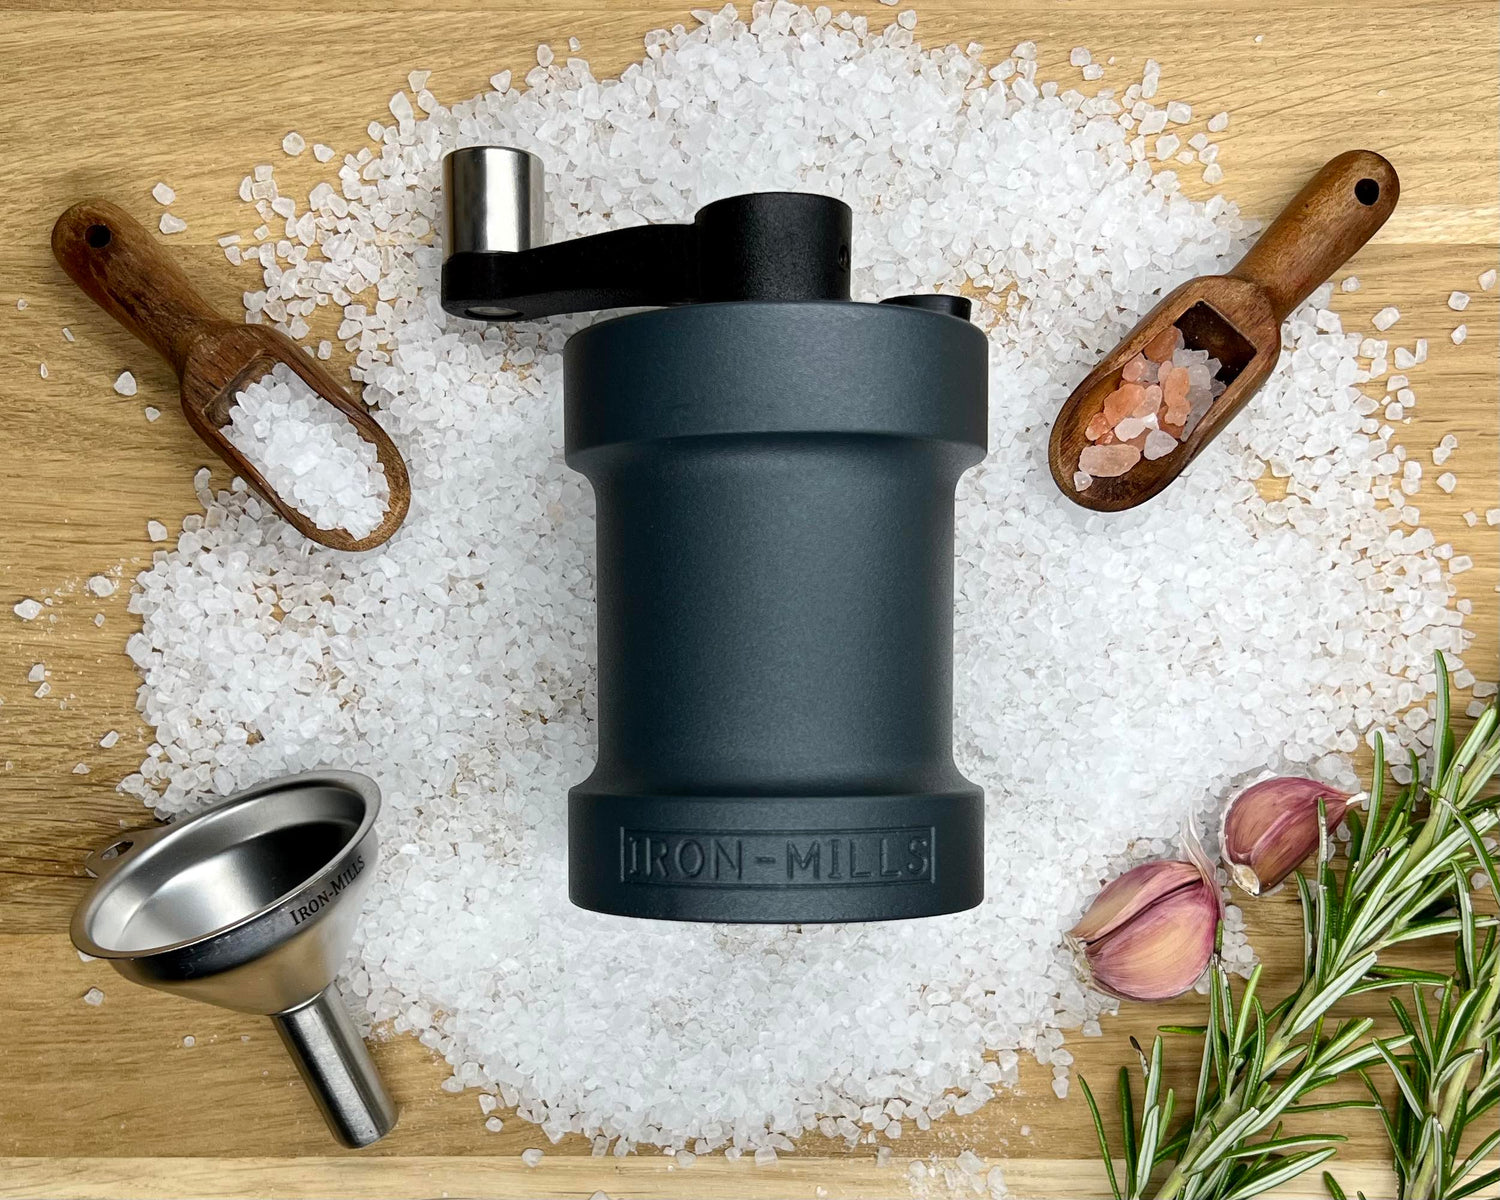 The Anthracite Mill from Iron-Mills - Quality Cast Iron Salt & Pepper Grinders on a bed of Rock Salt